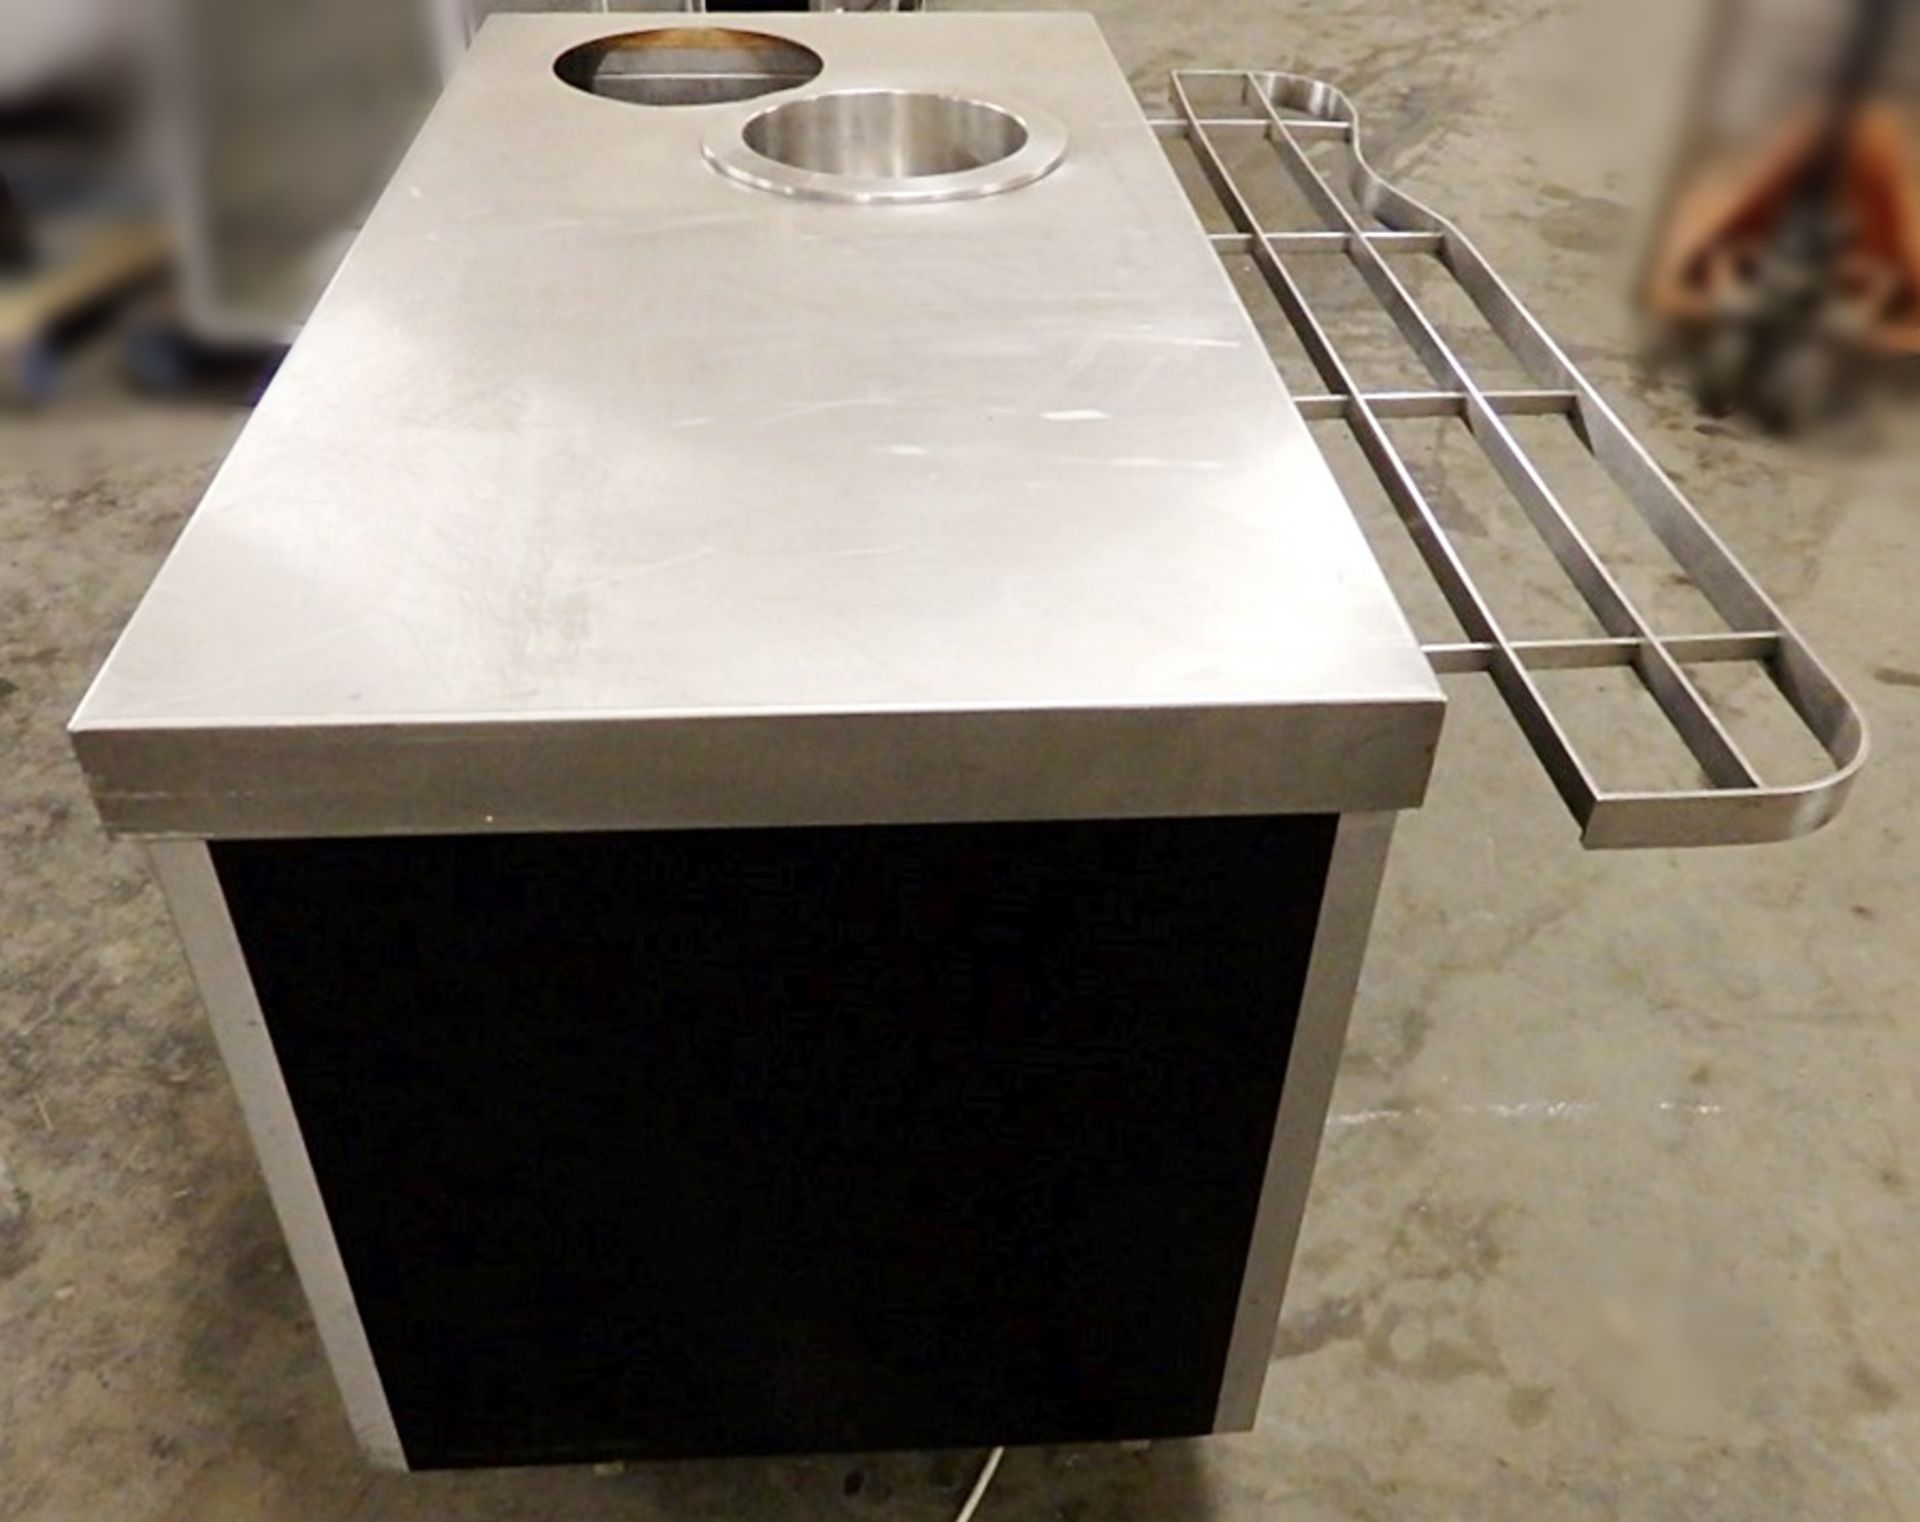 1 x Stainless Steel Hot Soup Counter - Features Tray Rail, Sockets & Fusebox - Dimensions: W150 x - Image 4 of 8